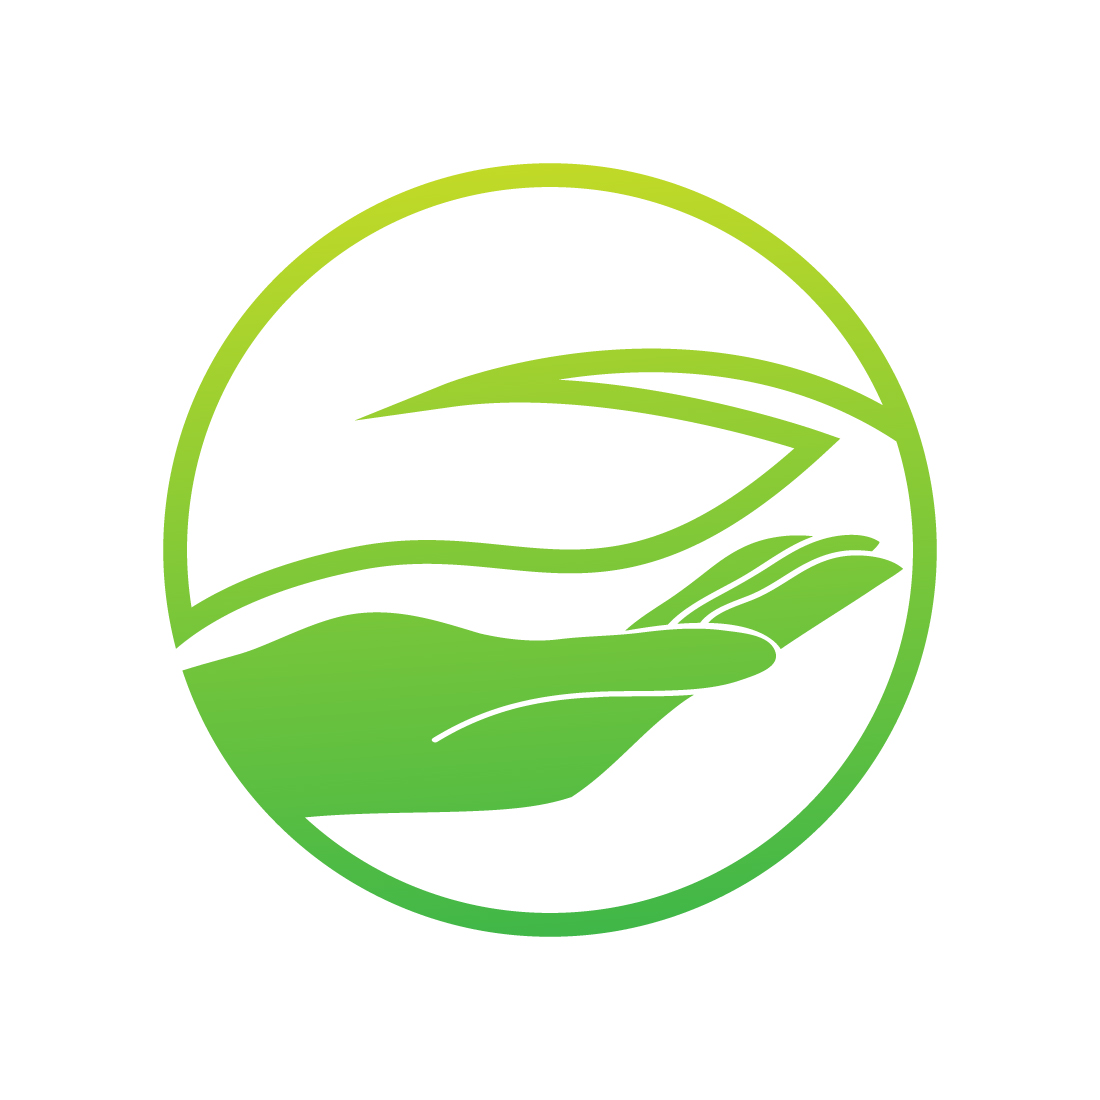 Fresh Hand and Leaf logo for health preview image.